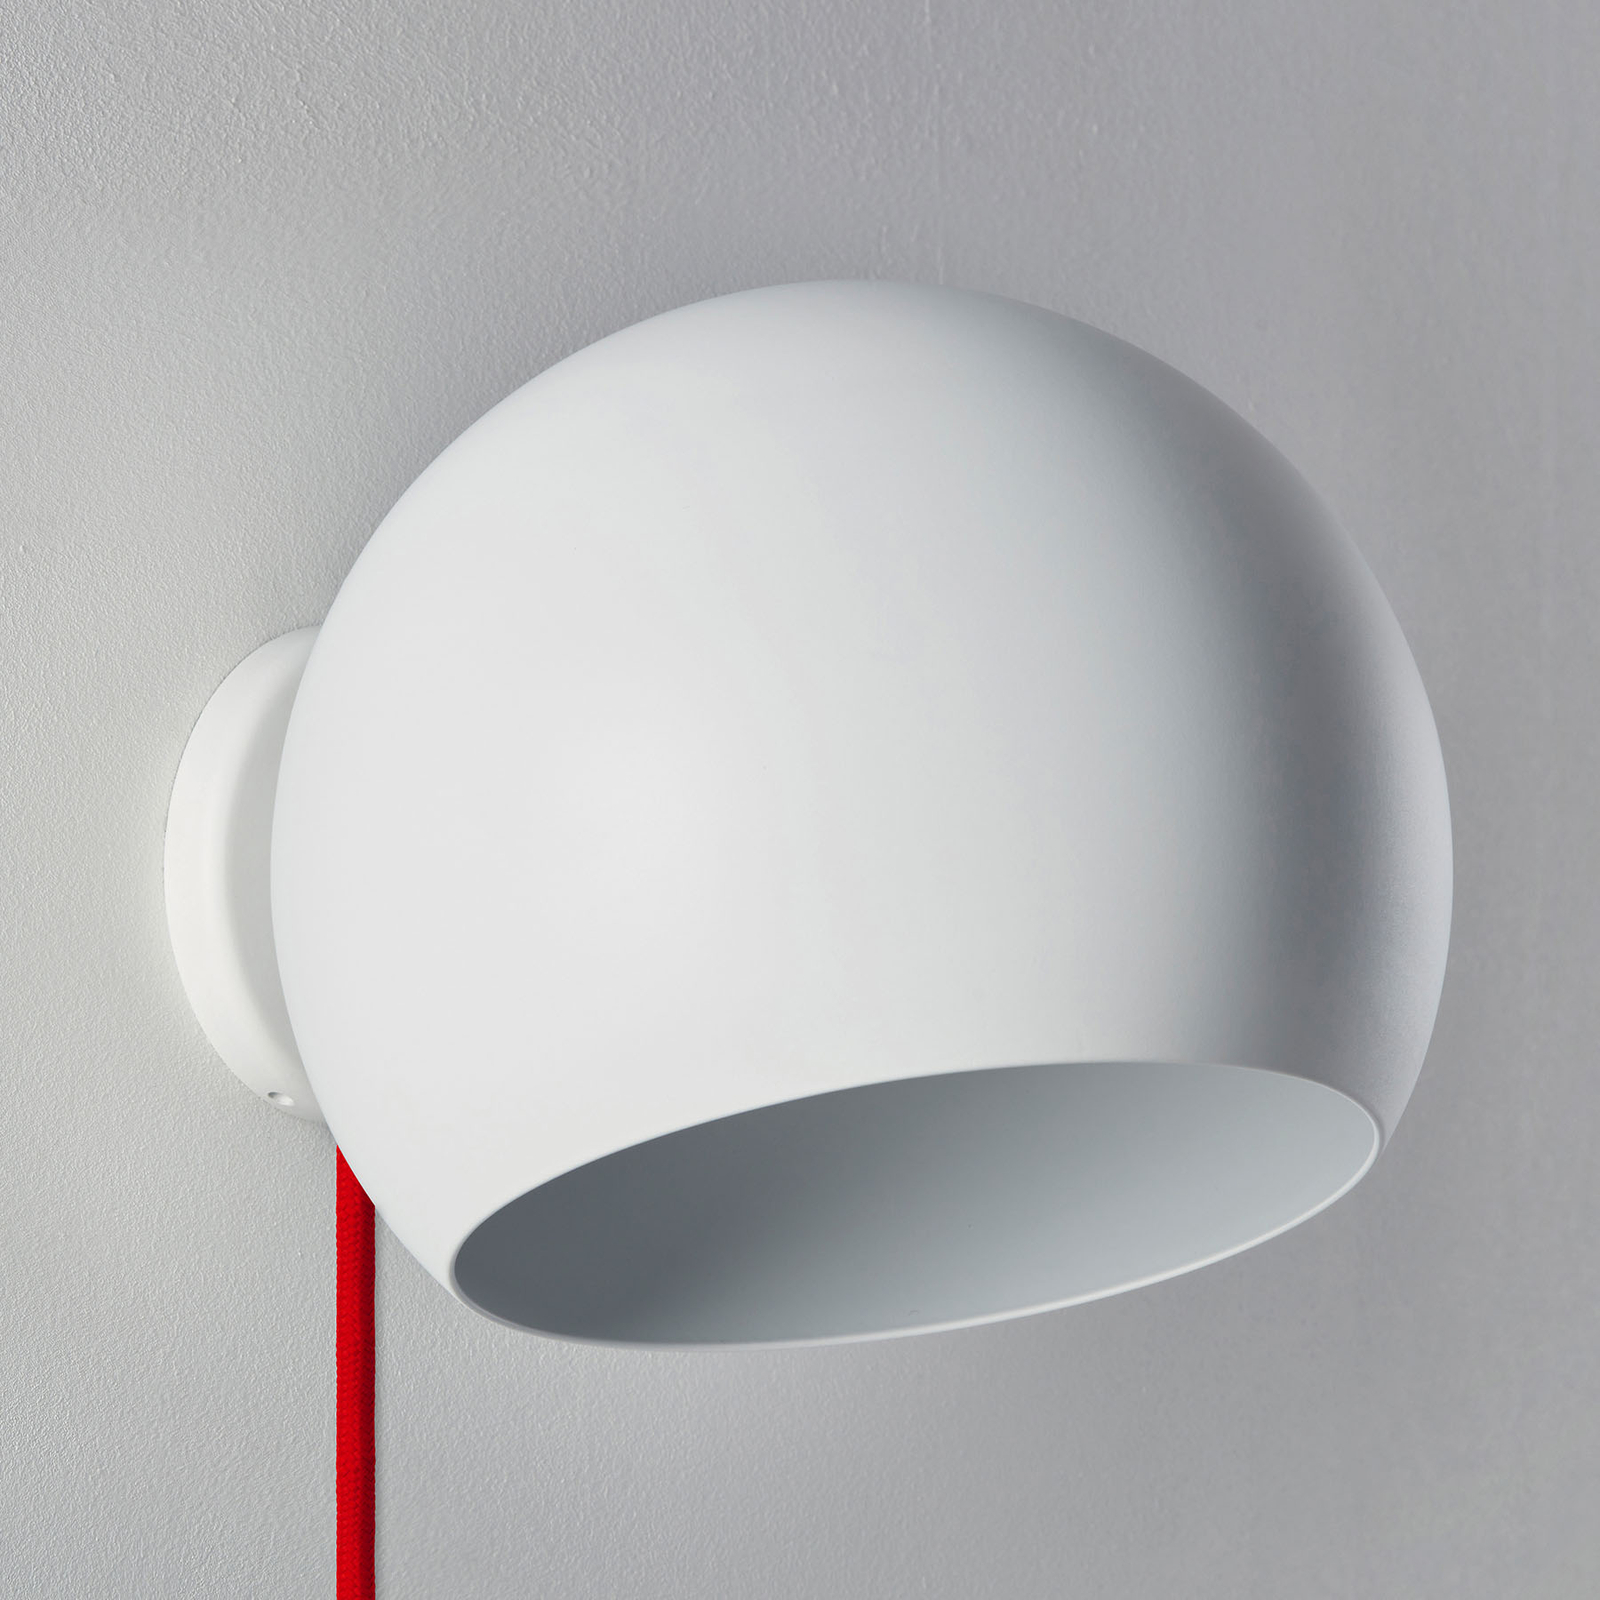 Nyta Tilt Globe Wall Short, red cable, white